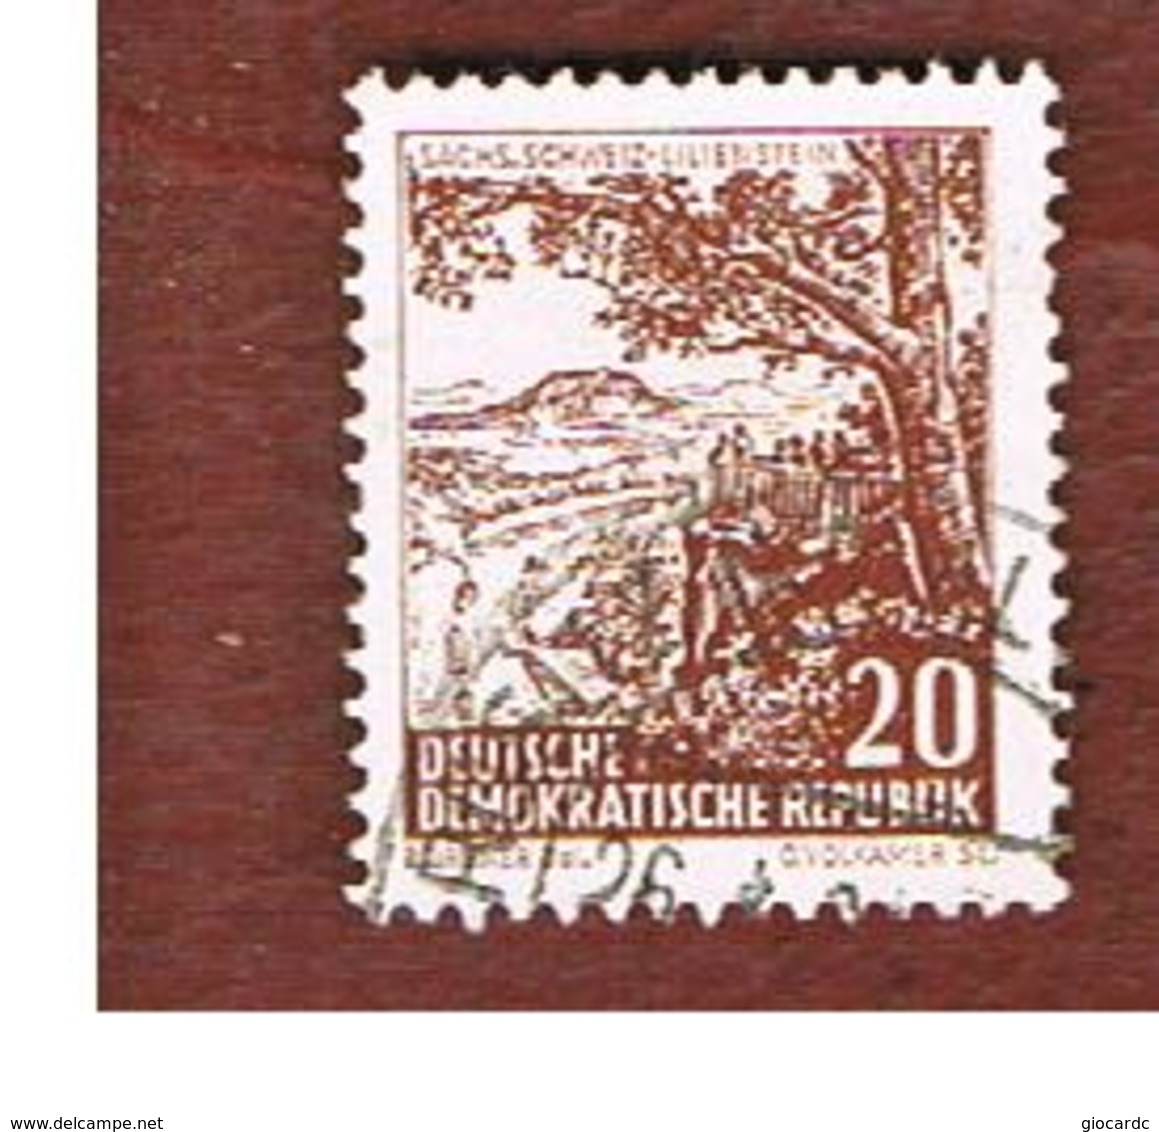 GERMANIA EST (EAST GERMANY) (DDR) - SG E549 - 1961  LANDSCAPES: LILIENSTEIN  -  USED - Usati